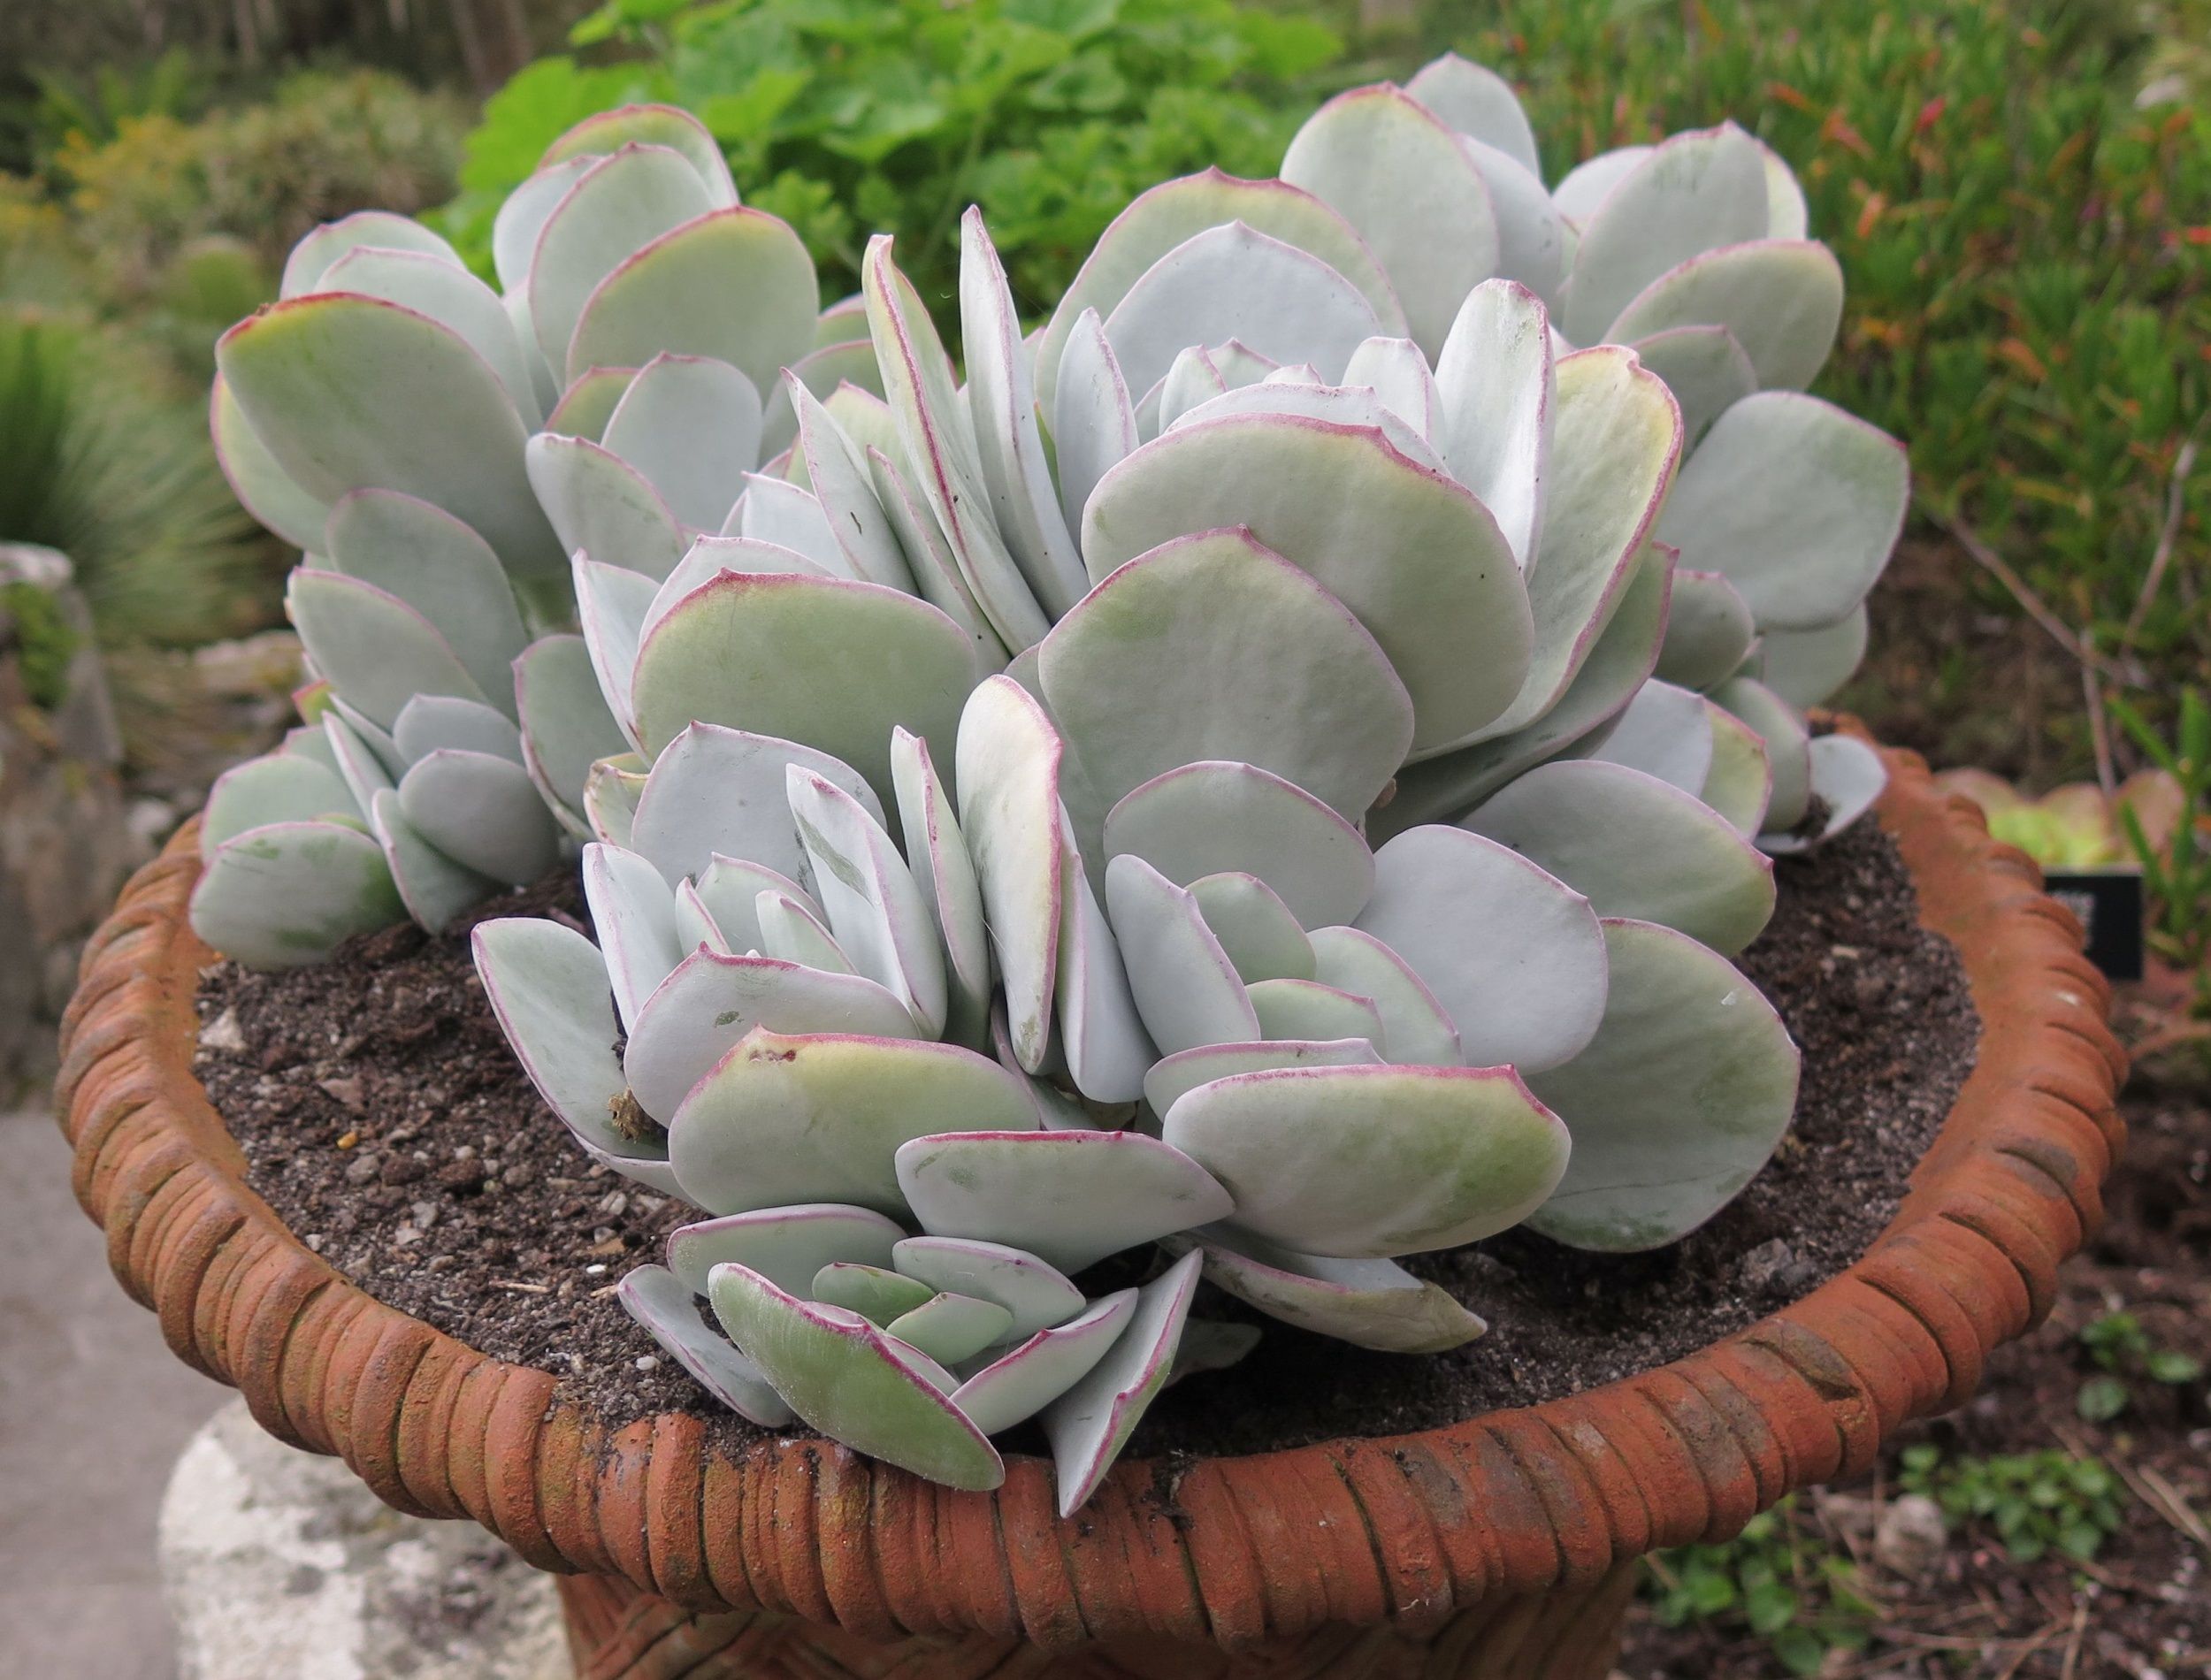 The Succulent, Crassula arborescens (Silver Jade Plant) Growing in a in a Terracotta Flowerpot in a Garden on the Island of Tresco, part of the Isles of Scilly, England, UK